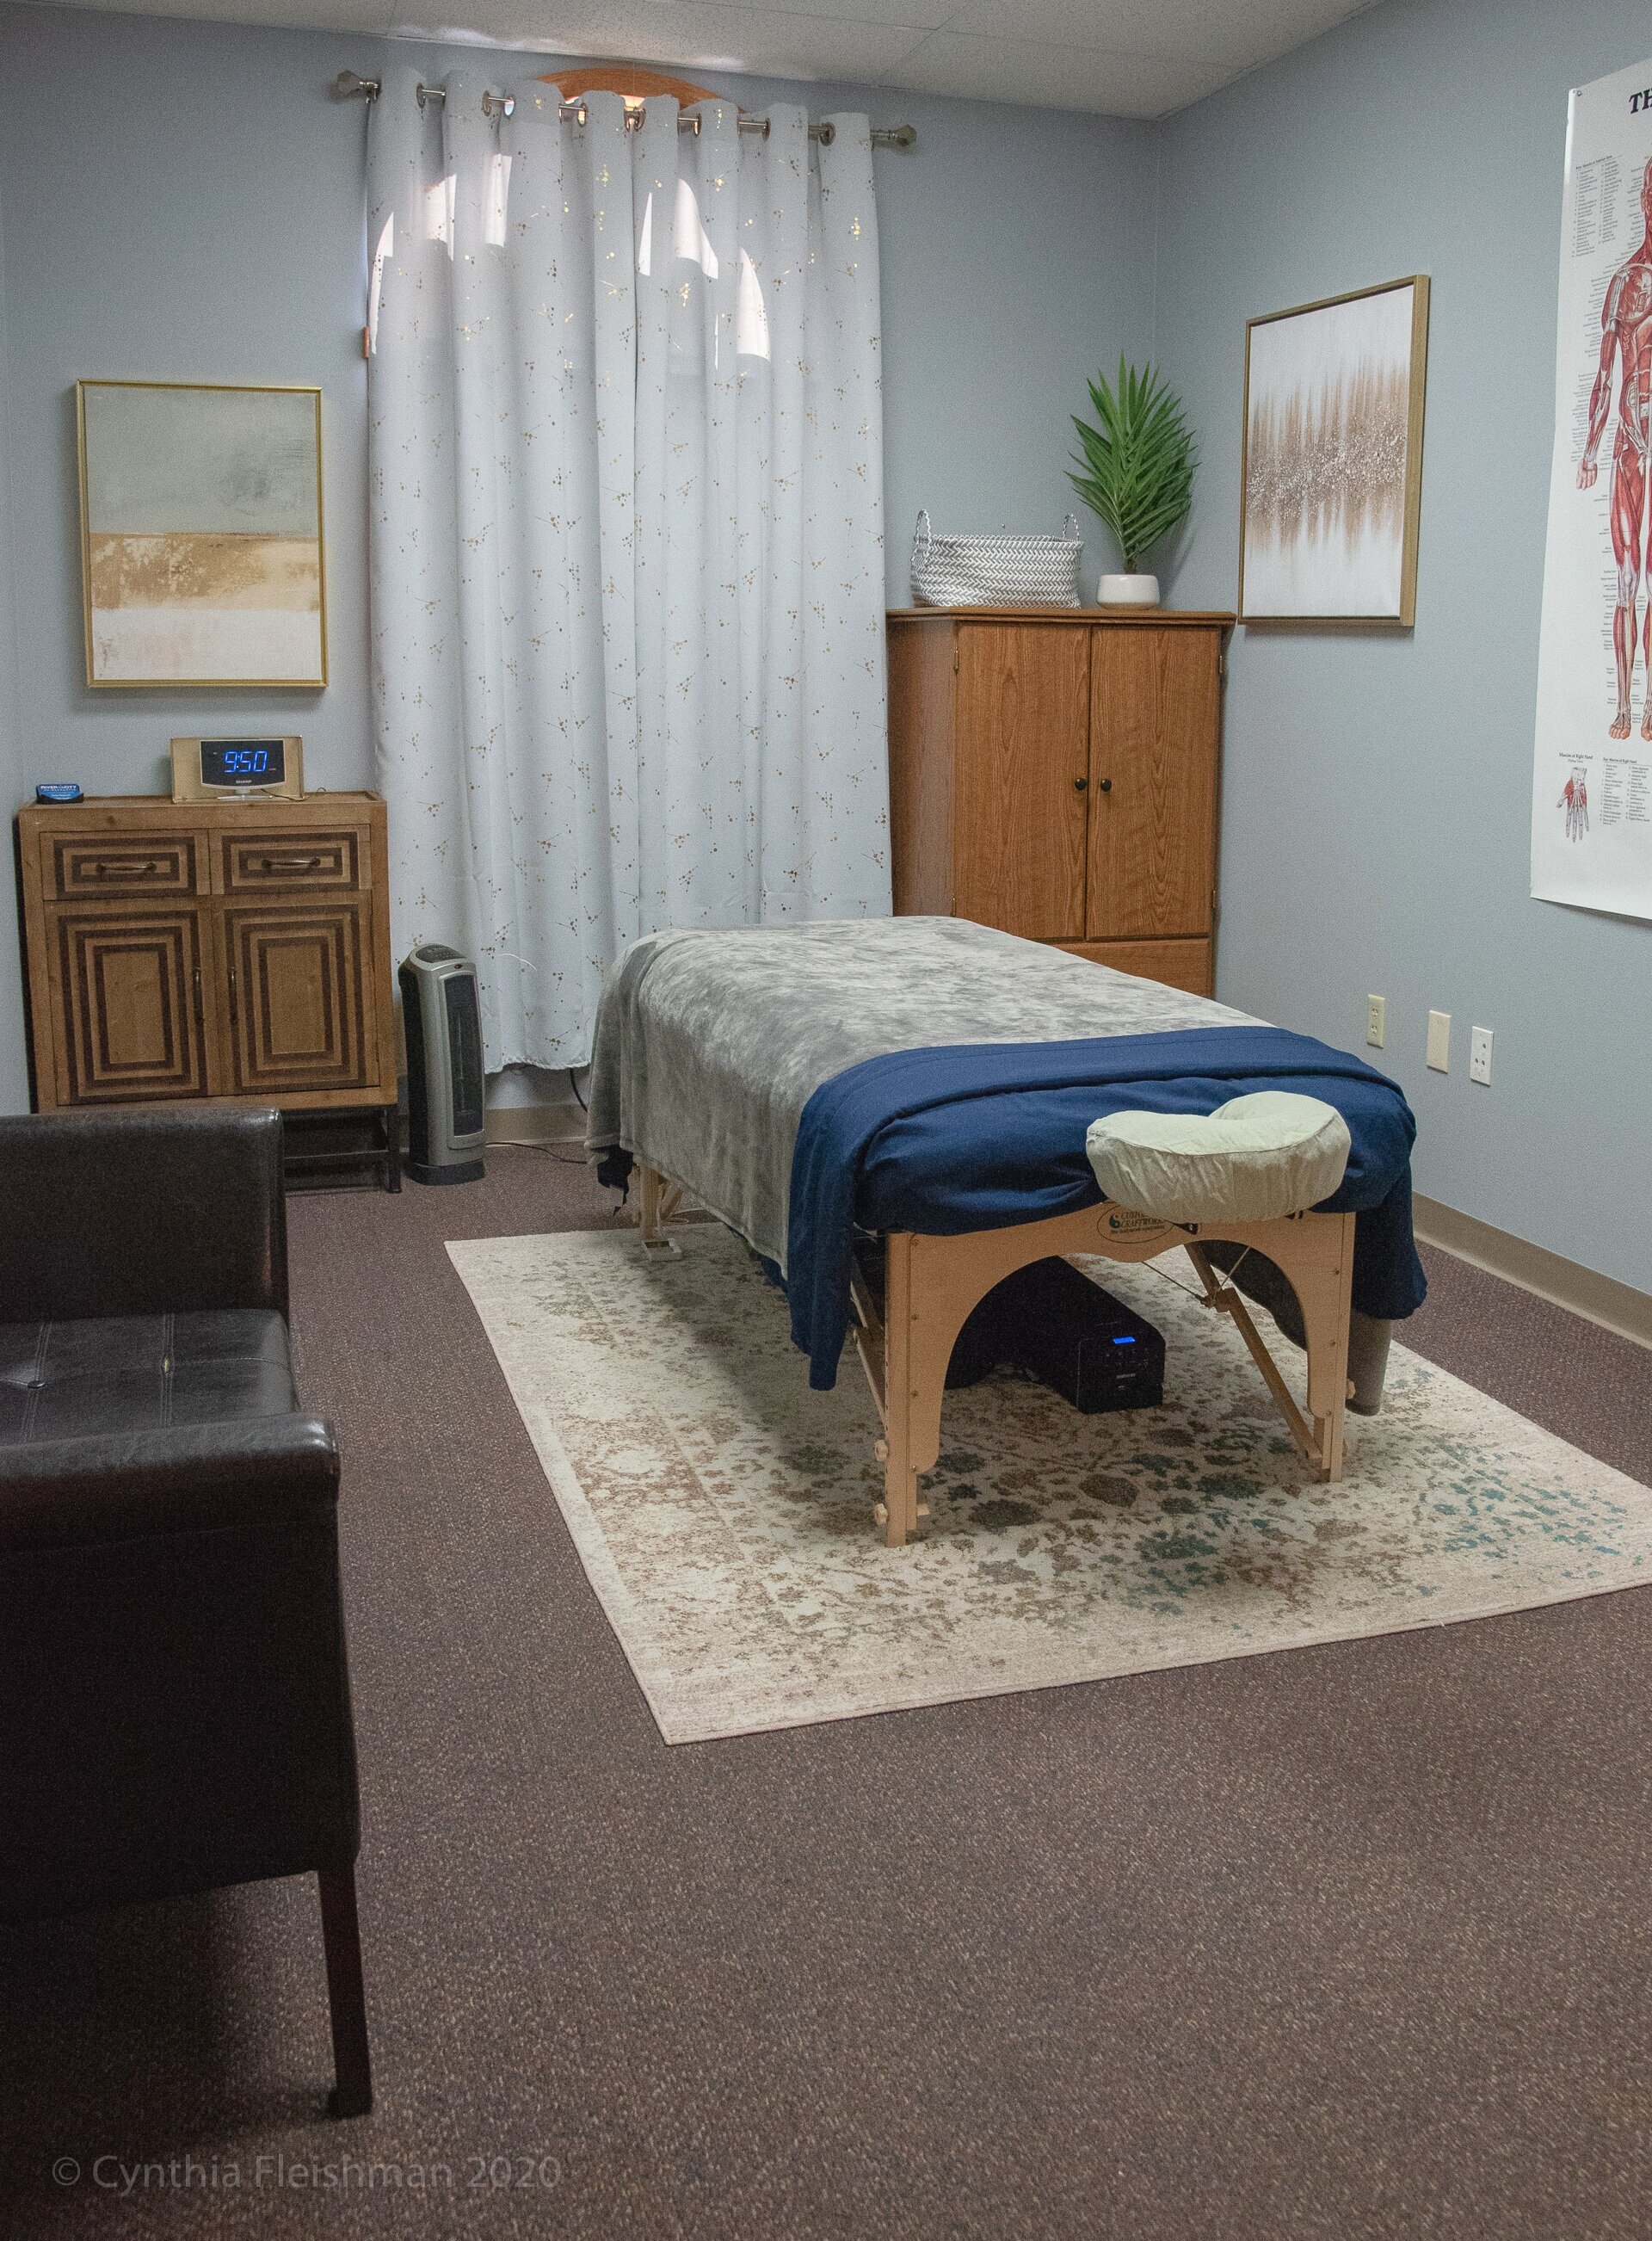 Our treatment rooms are warm and comfortable.